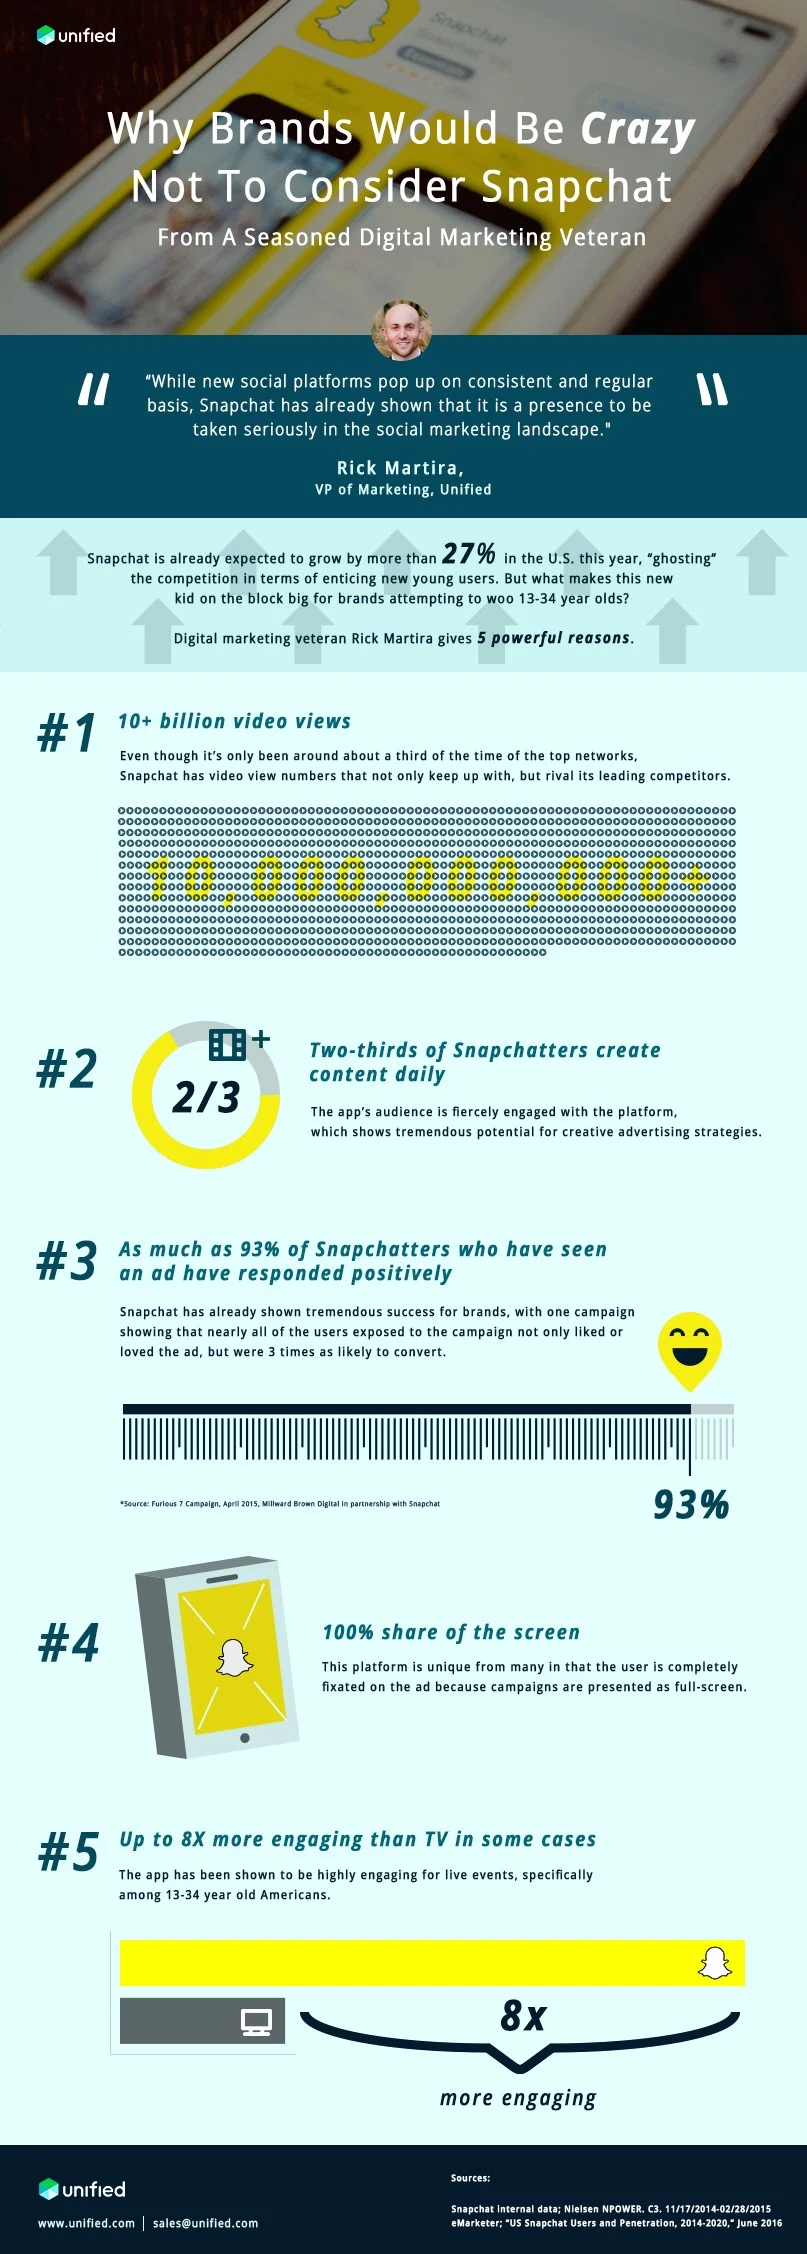 Why Brands Would Be Crazy Not To Consider Snapchat From A Seasoned Digital Marketing Veteran - #Infographic